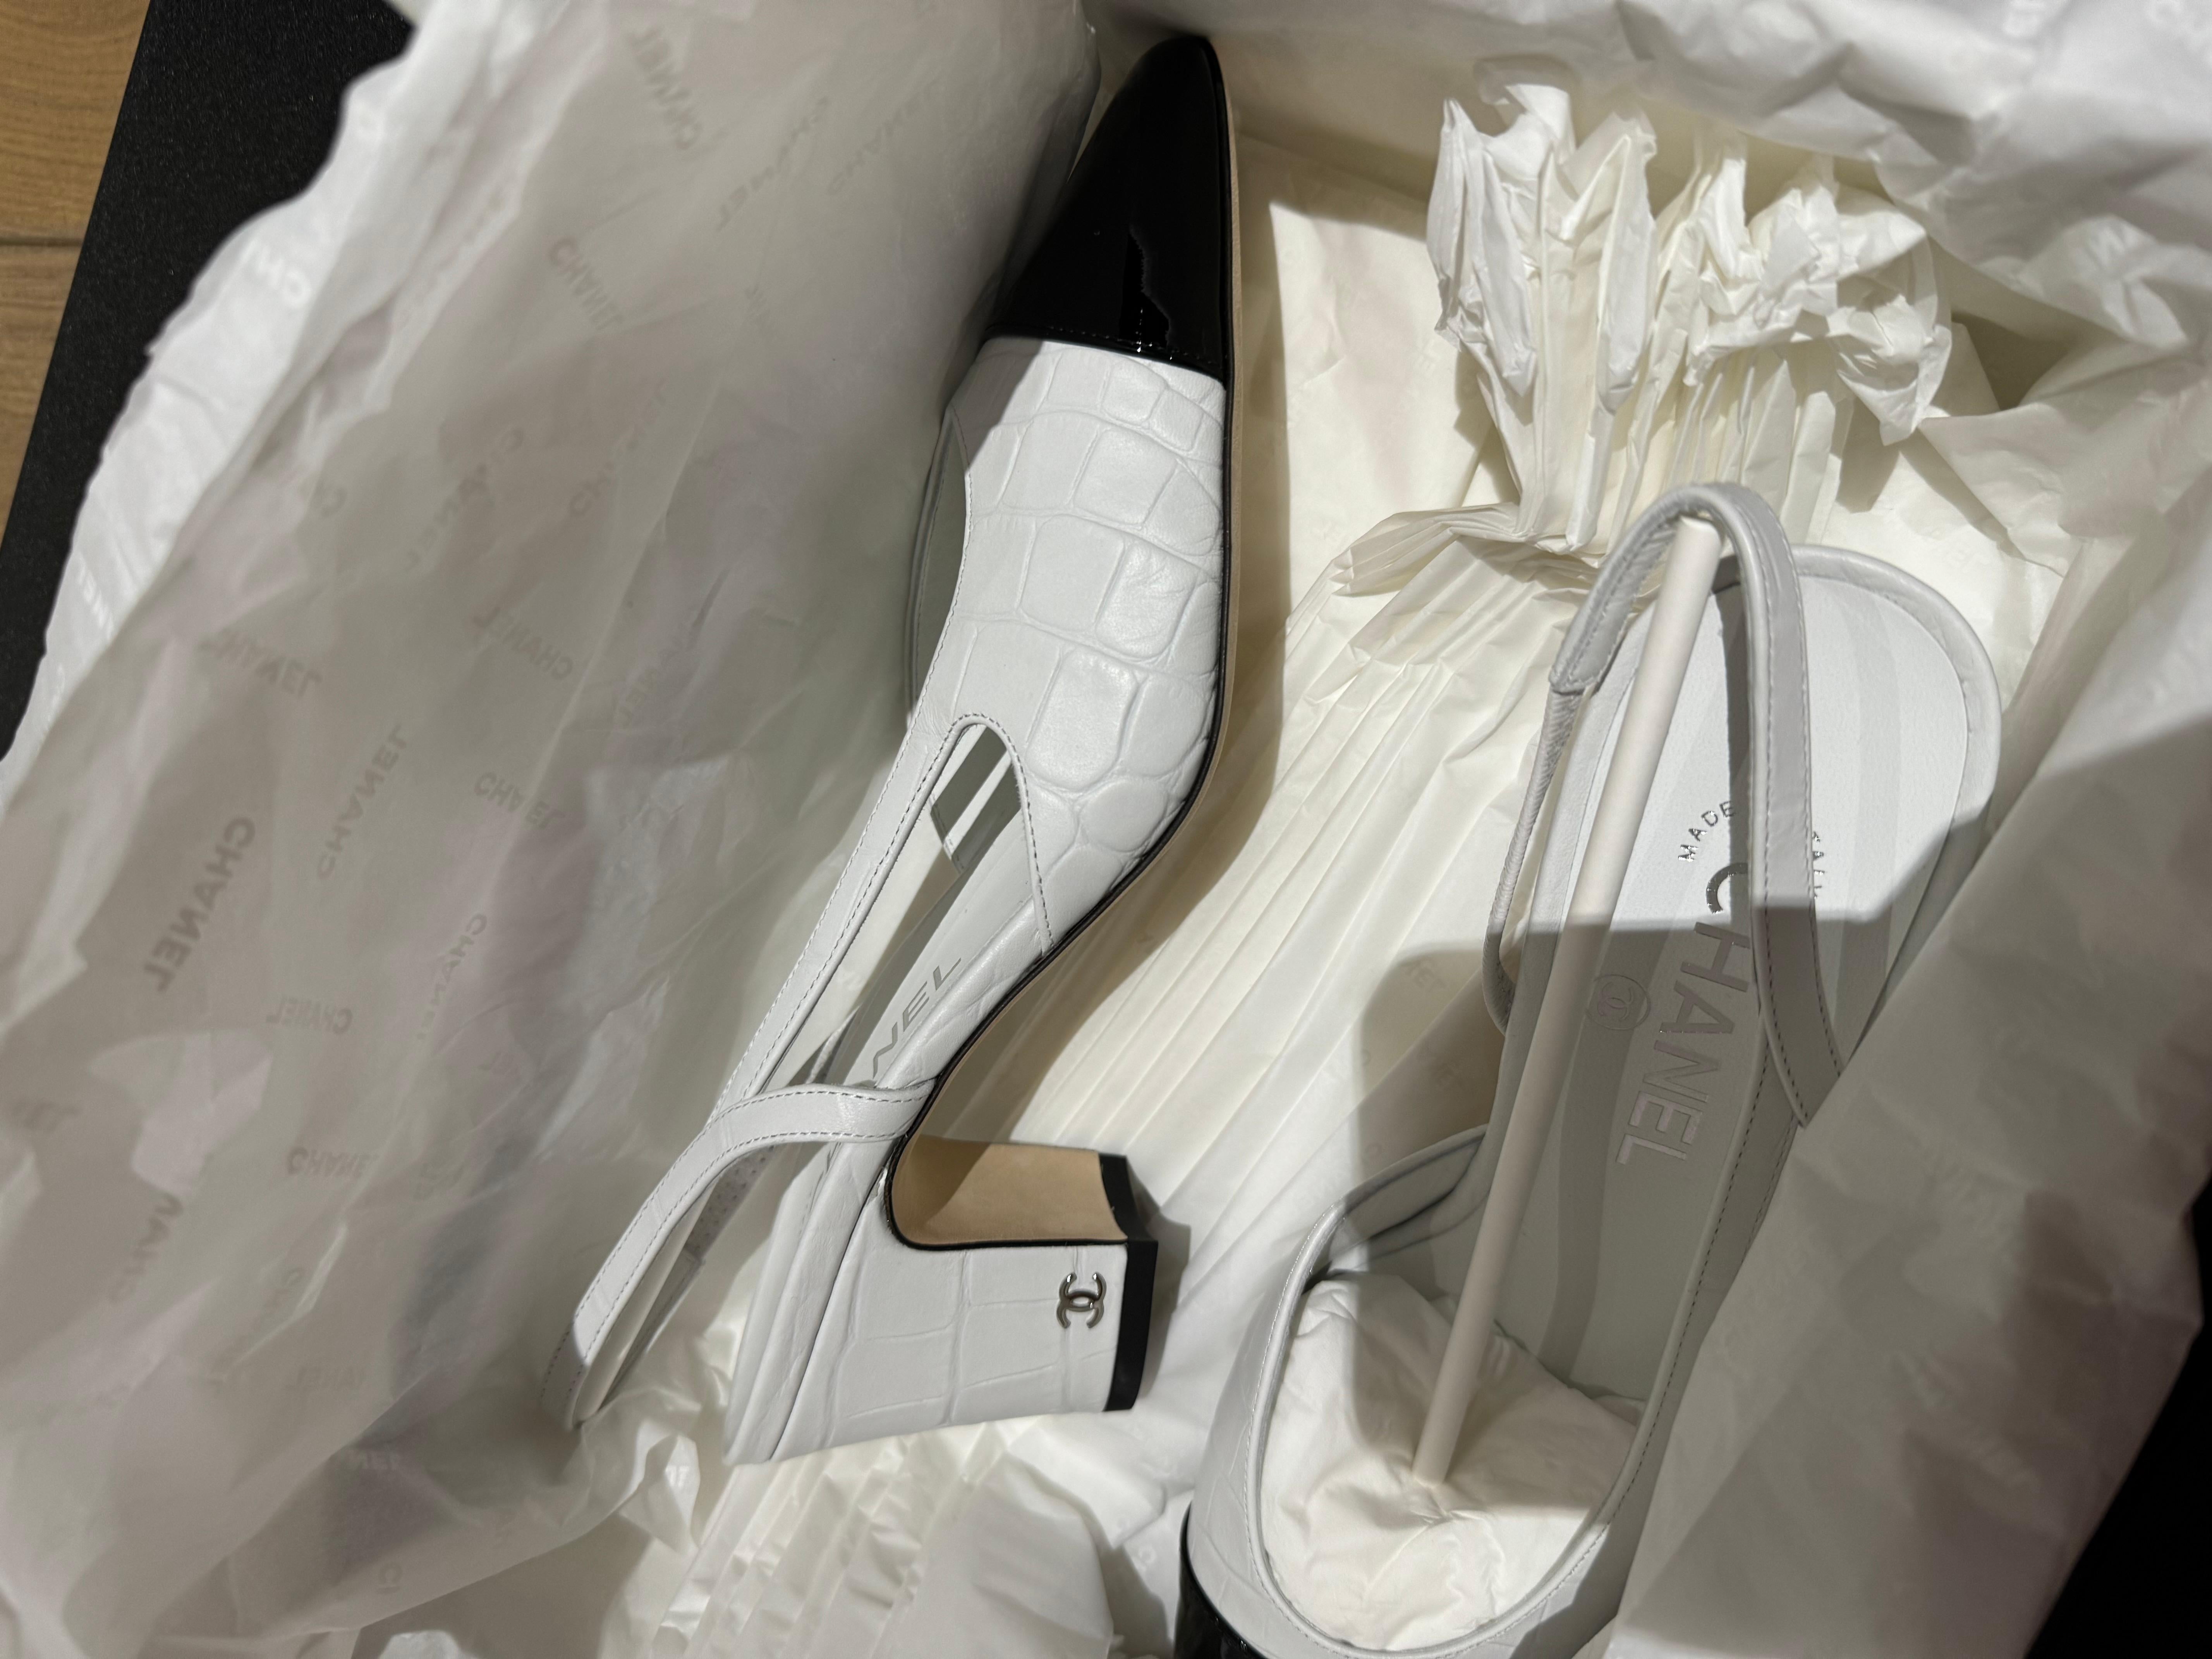 Chanel slingback sandals in white ( crocodile pattern) and black. Sold out very limited. Size 38.5c new in box and dustbags.